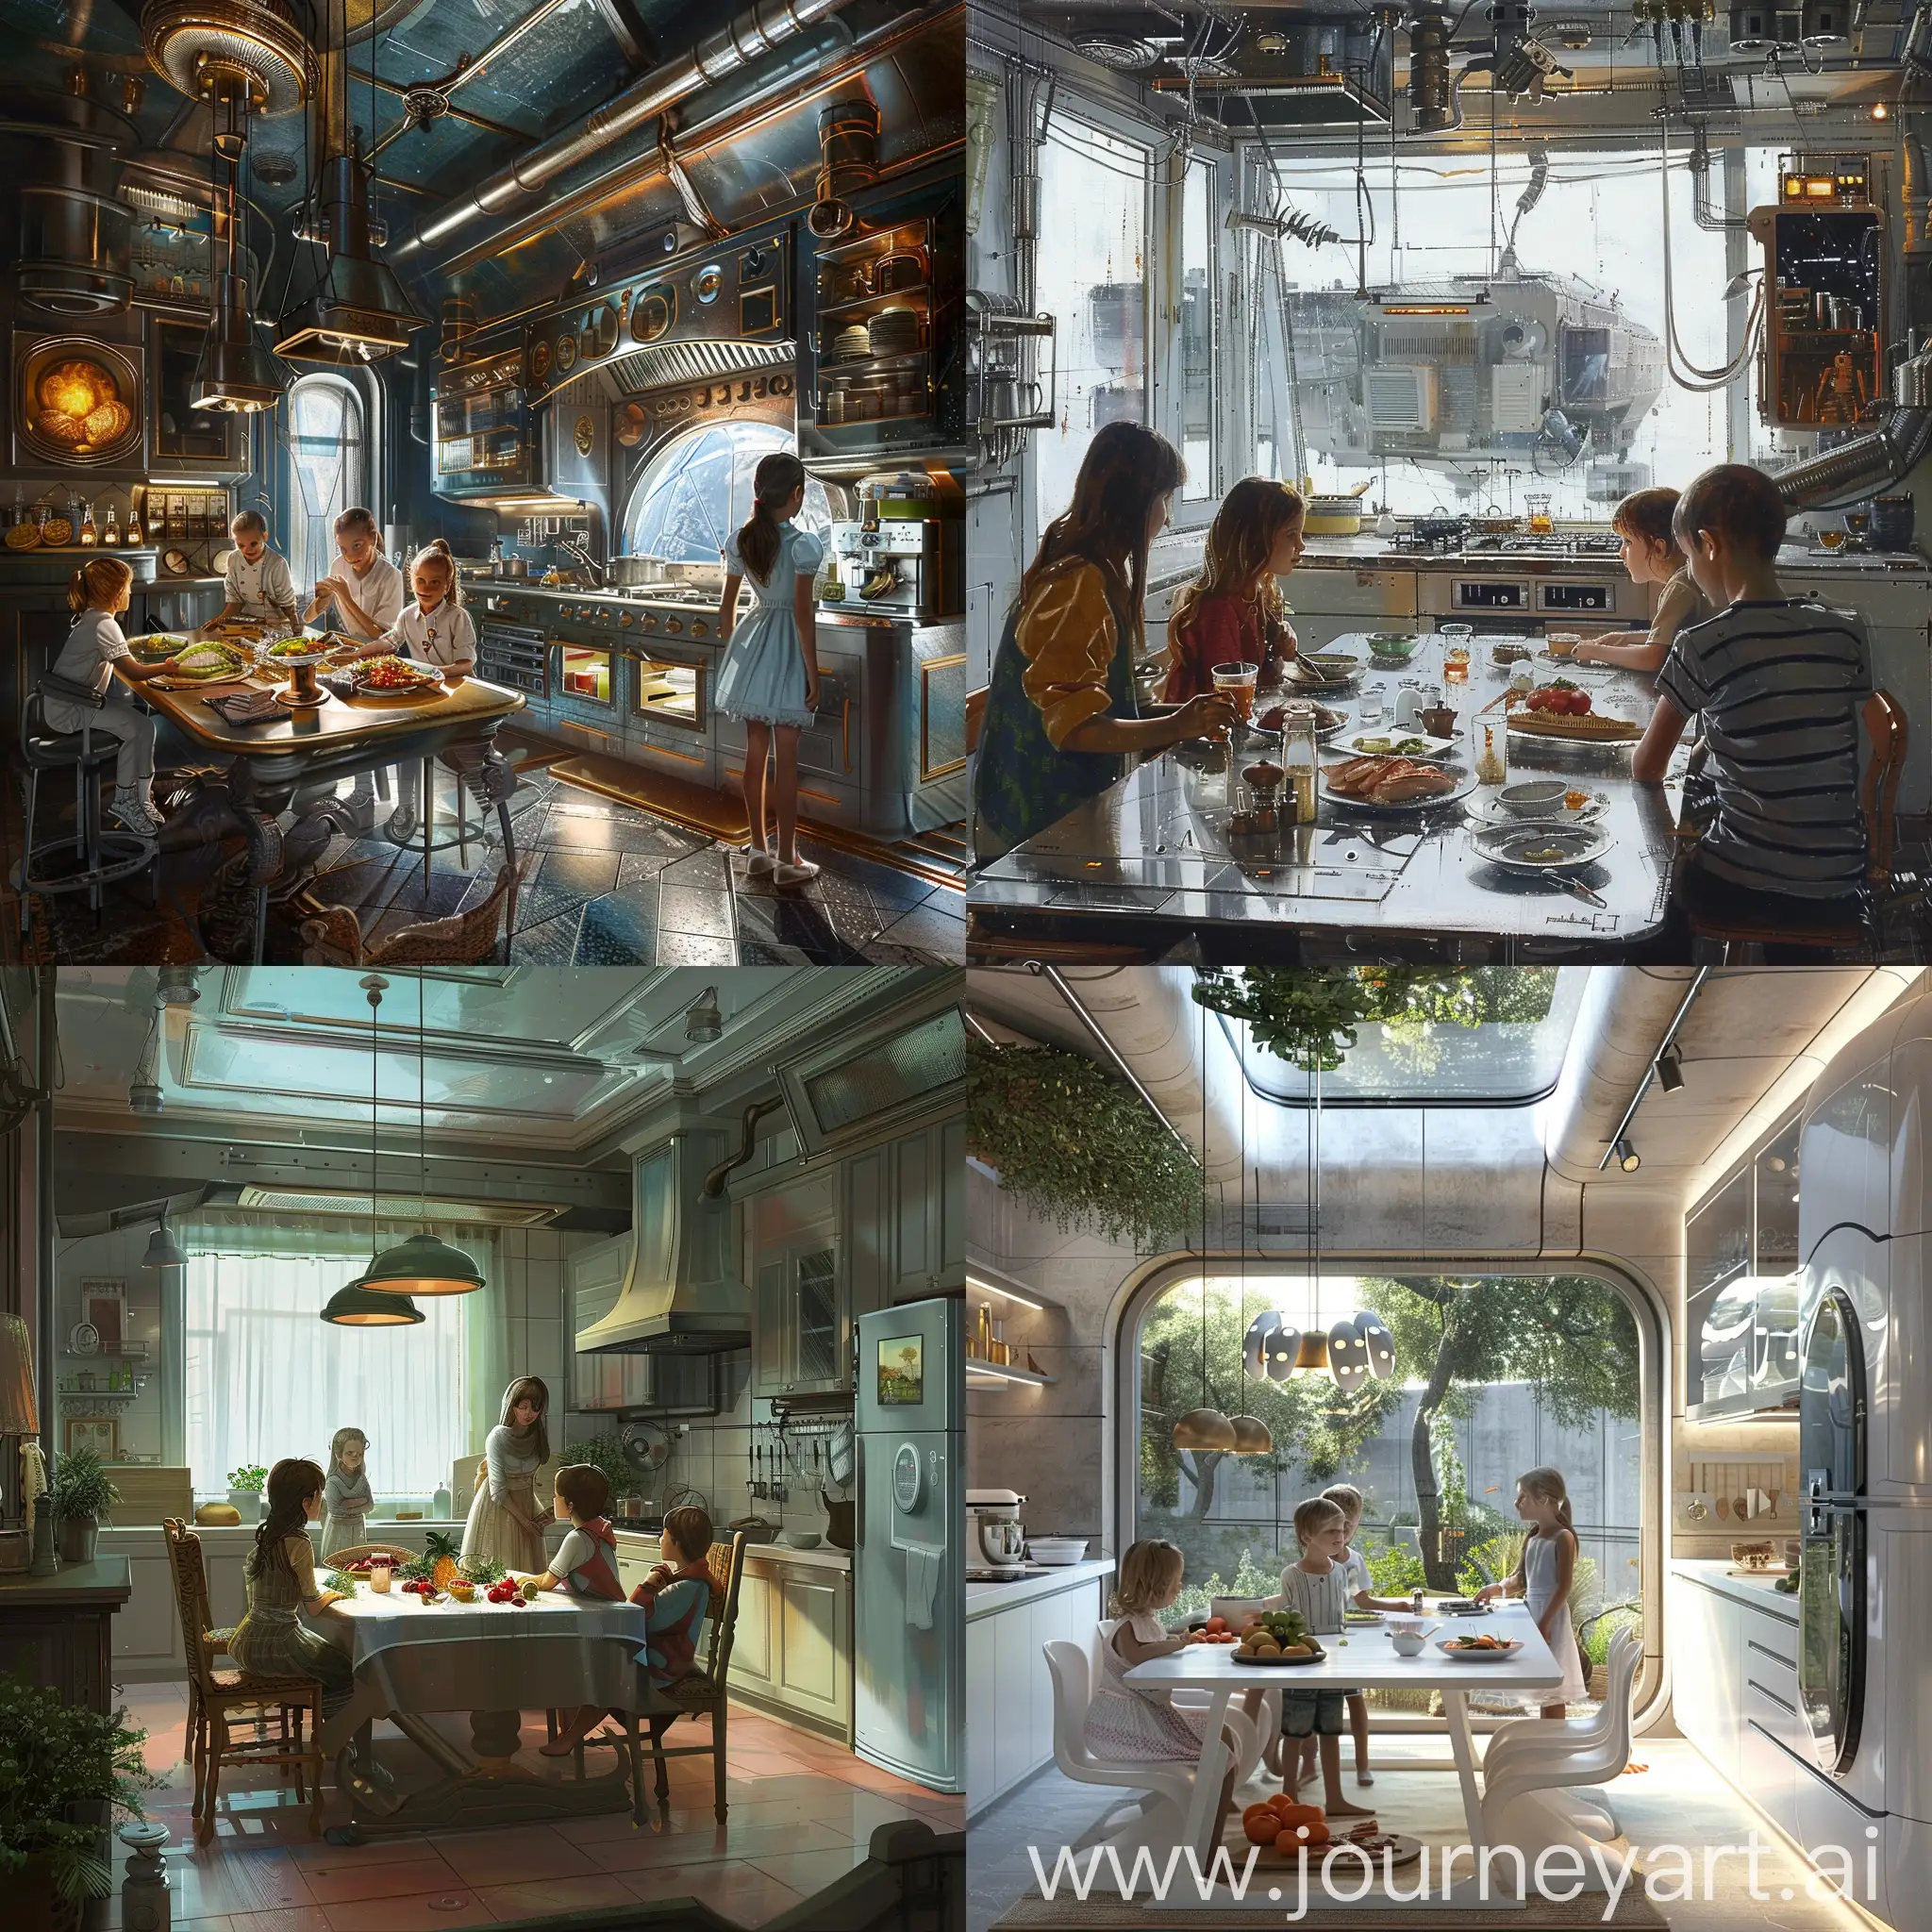 Futuristic-Russian-Kitchen-Two-Girls-and-Three-Boys-Engaged-in-SciFi-Exploration